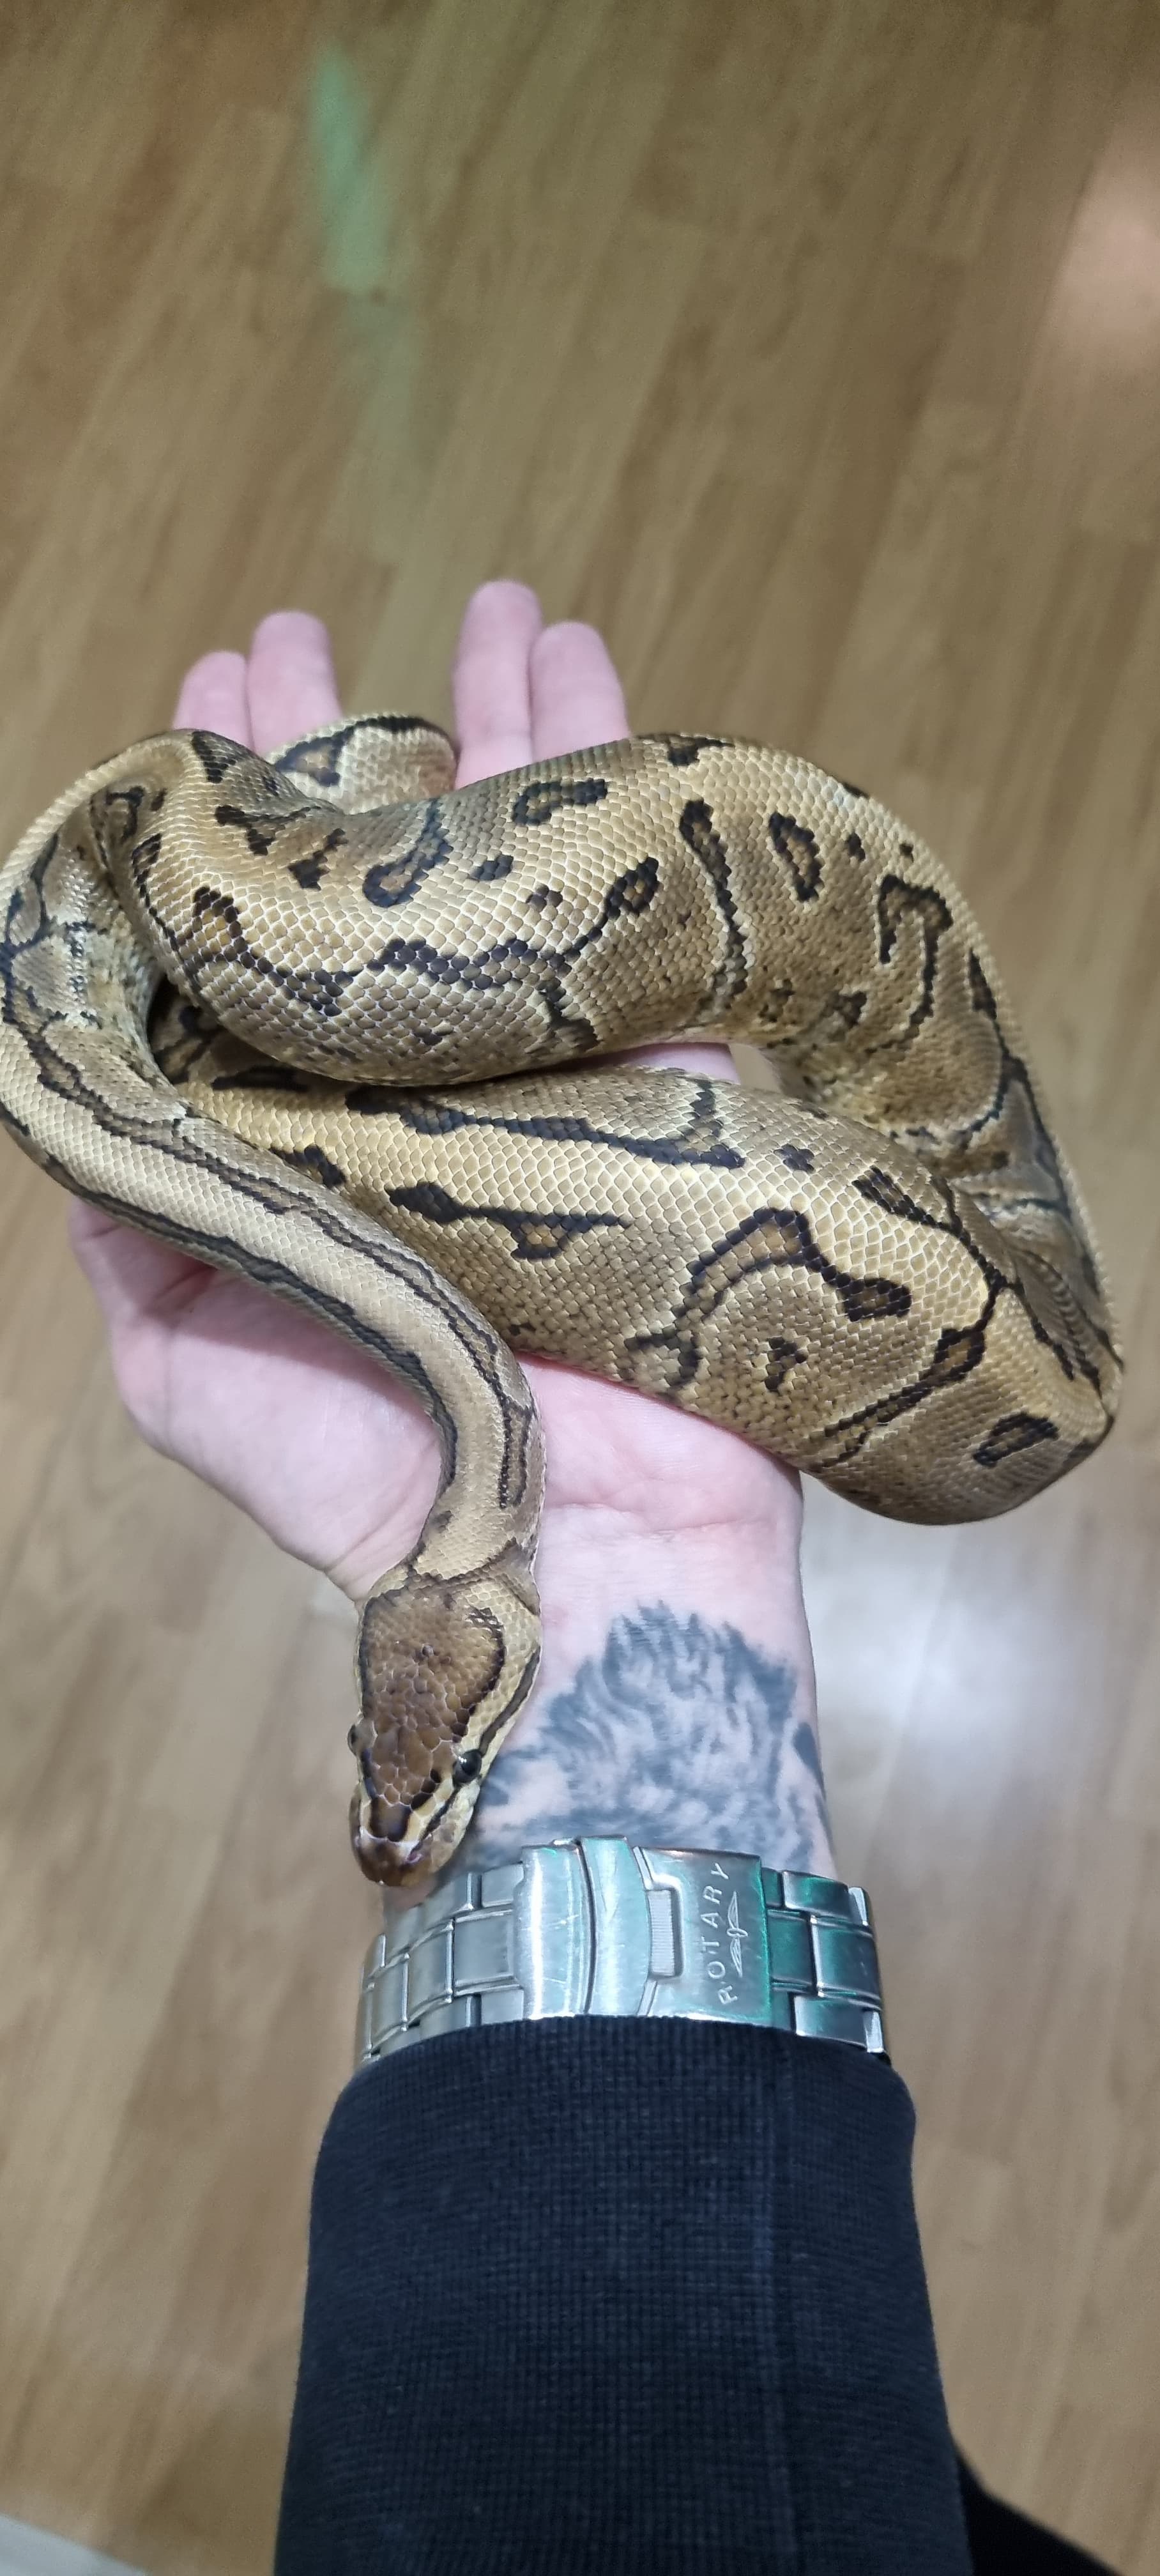 Pinstripe Gravel by Slitheryin Reptiles